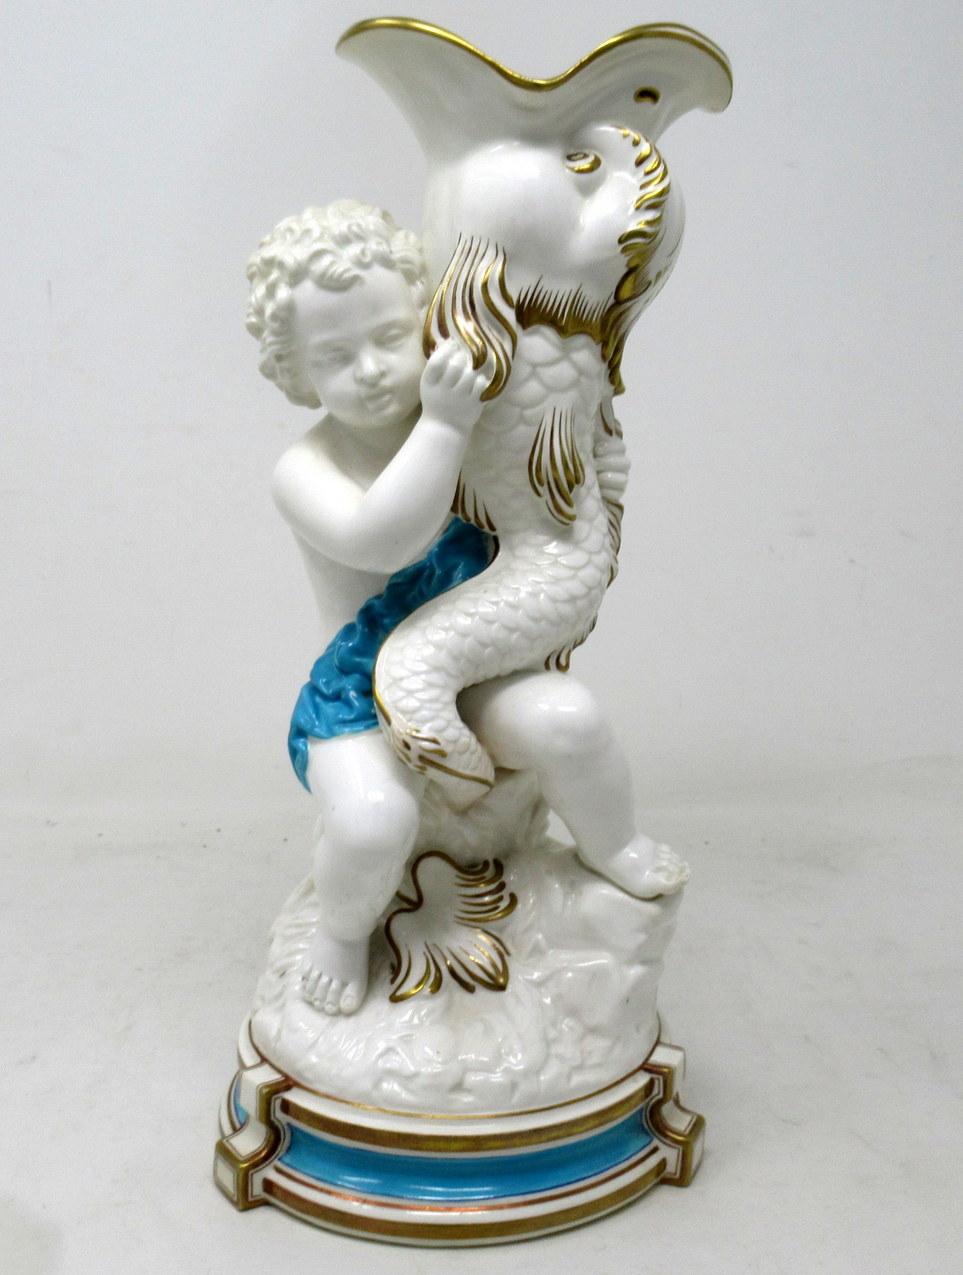 Stunning example of an English Minton Porcelain centerpiece or flower vase, depicting an entwined upright Dolphin been help by a scantily clad Female standing on a naturalistic circular base. Circa third quarter of the Nineteenth Century.